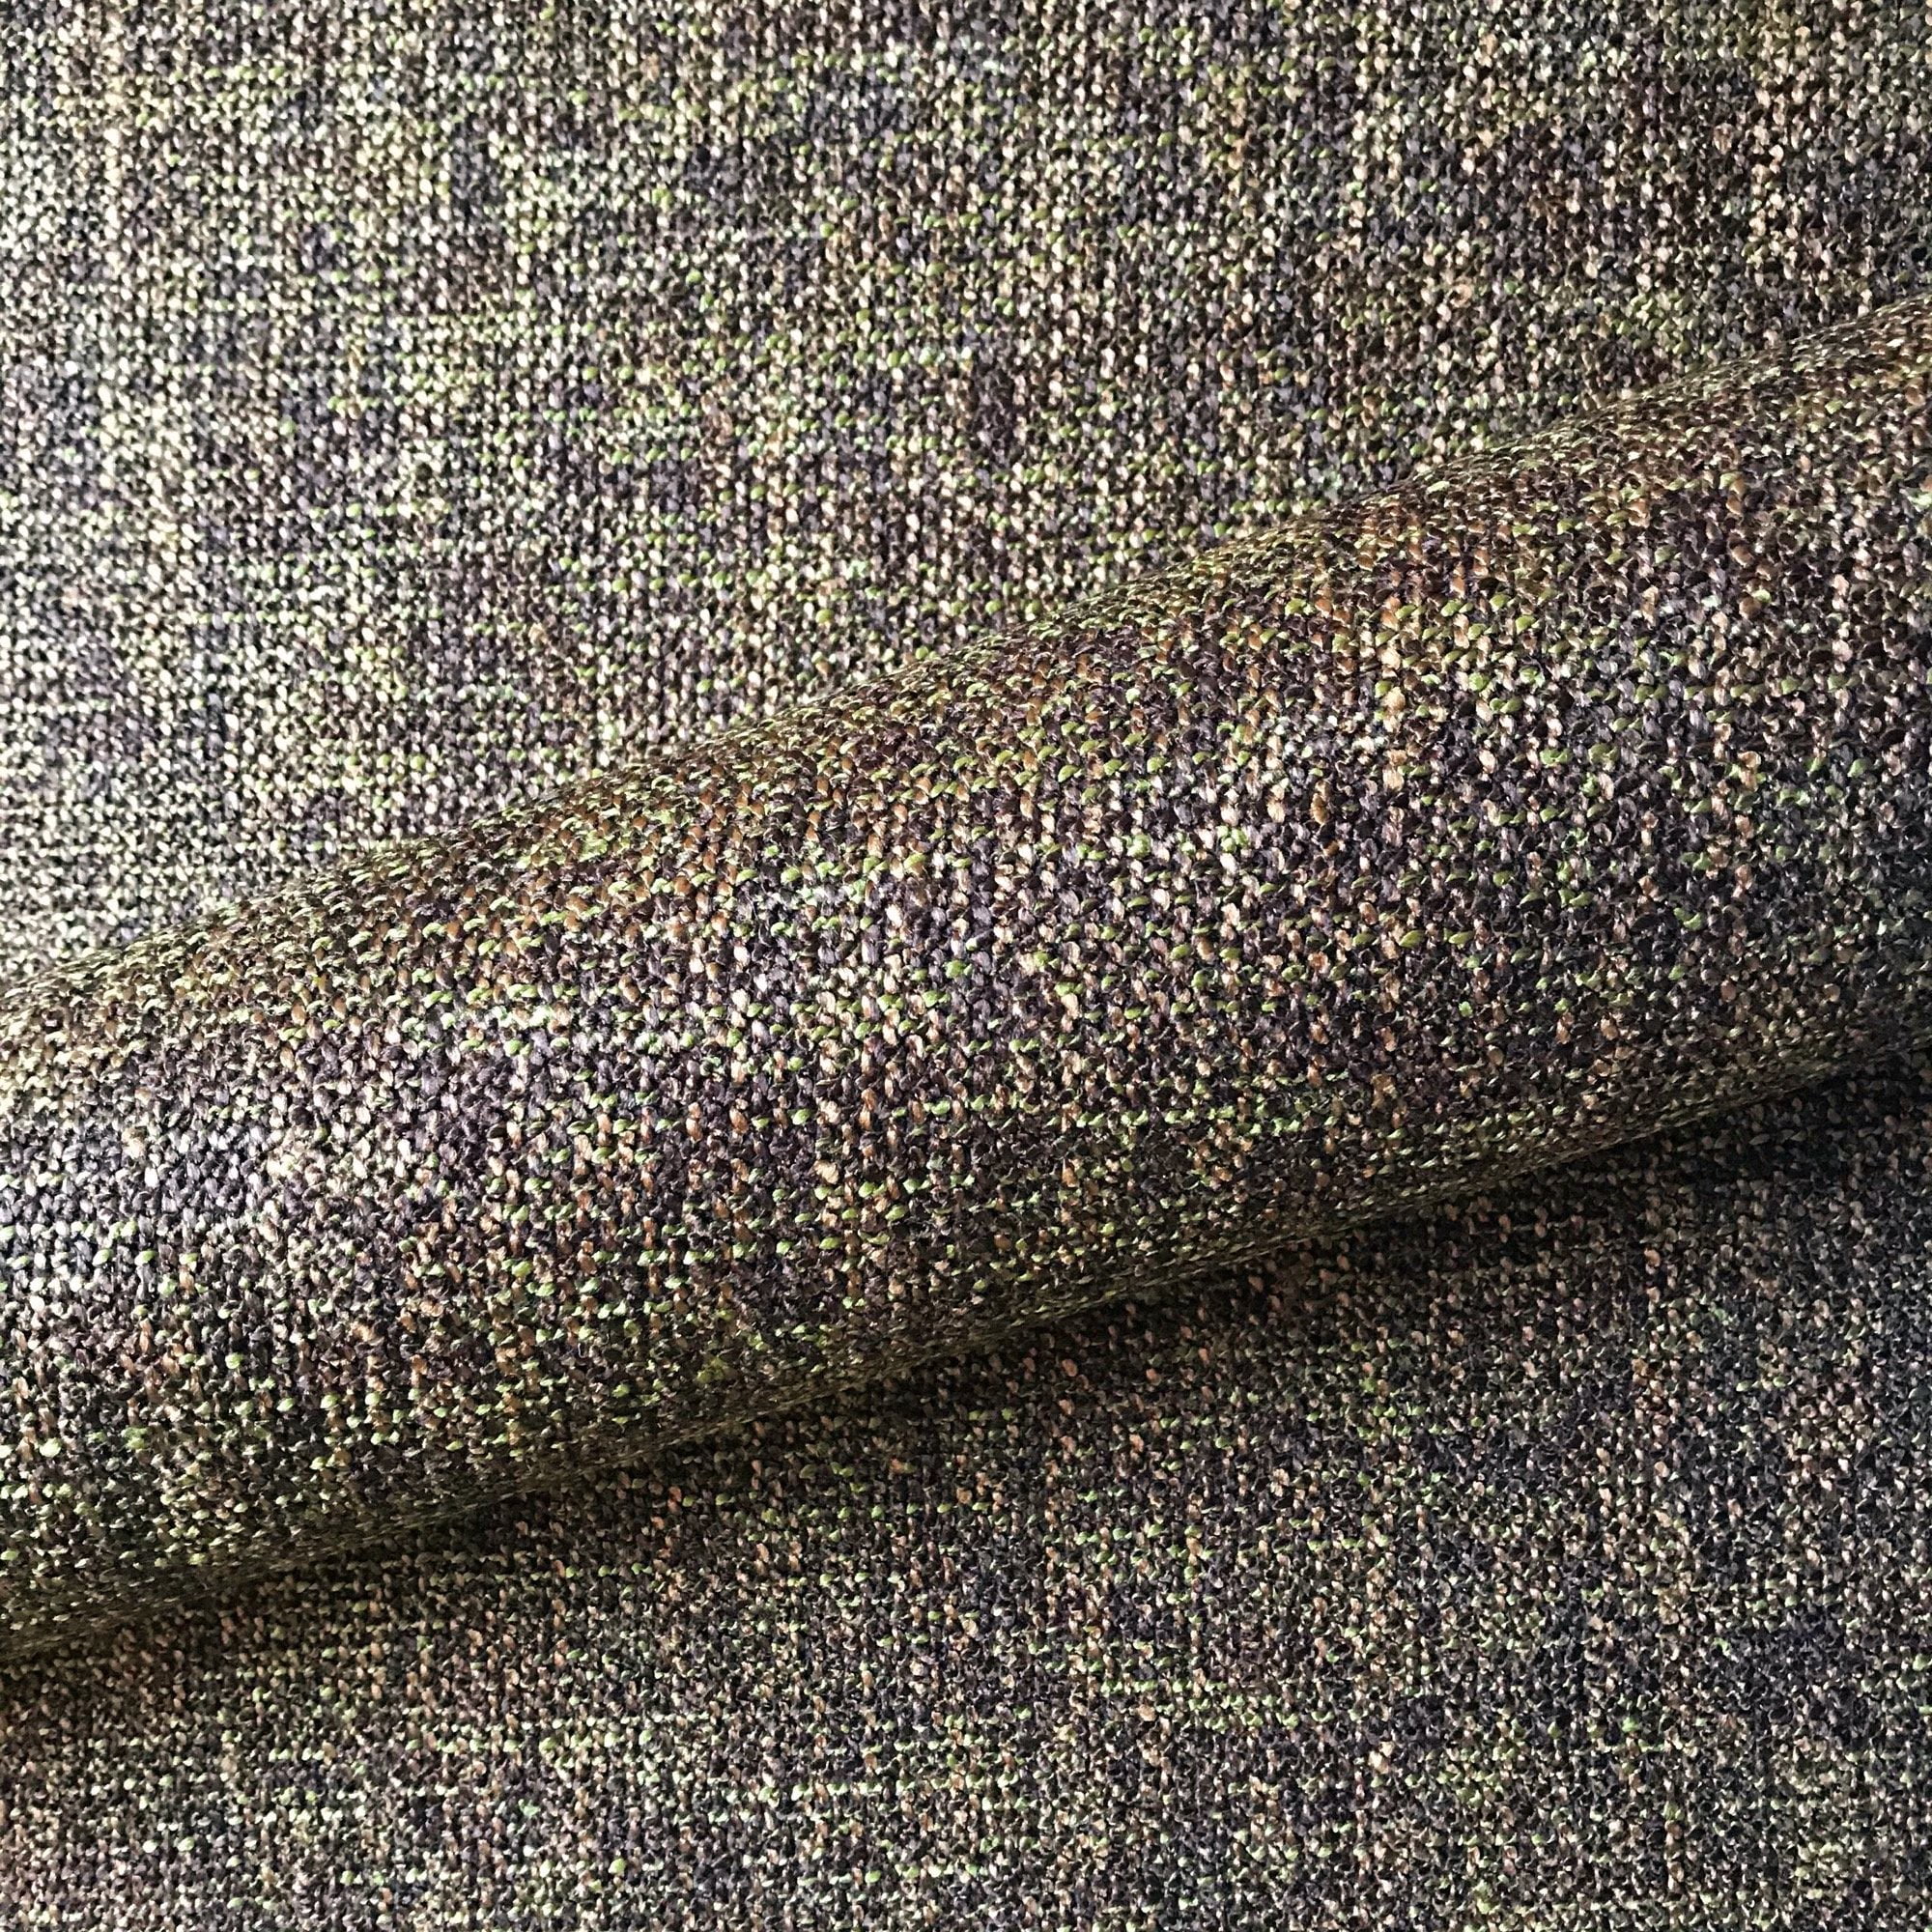 Copper Brown Boucle Upholstery Fabric by the Yard, Puffy Textured Boucle  Furnishing Fabric, Cushion Furniture Chair Sofa Upholstery Fabric 